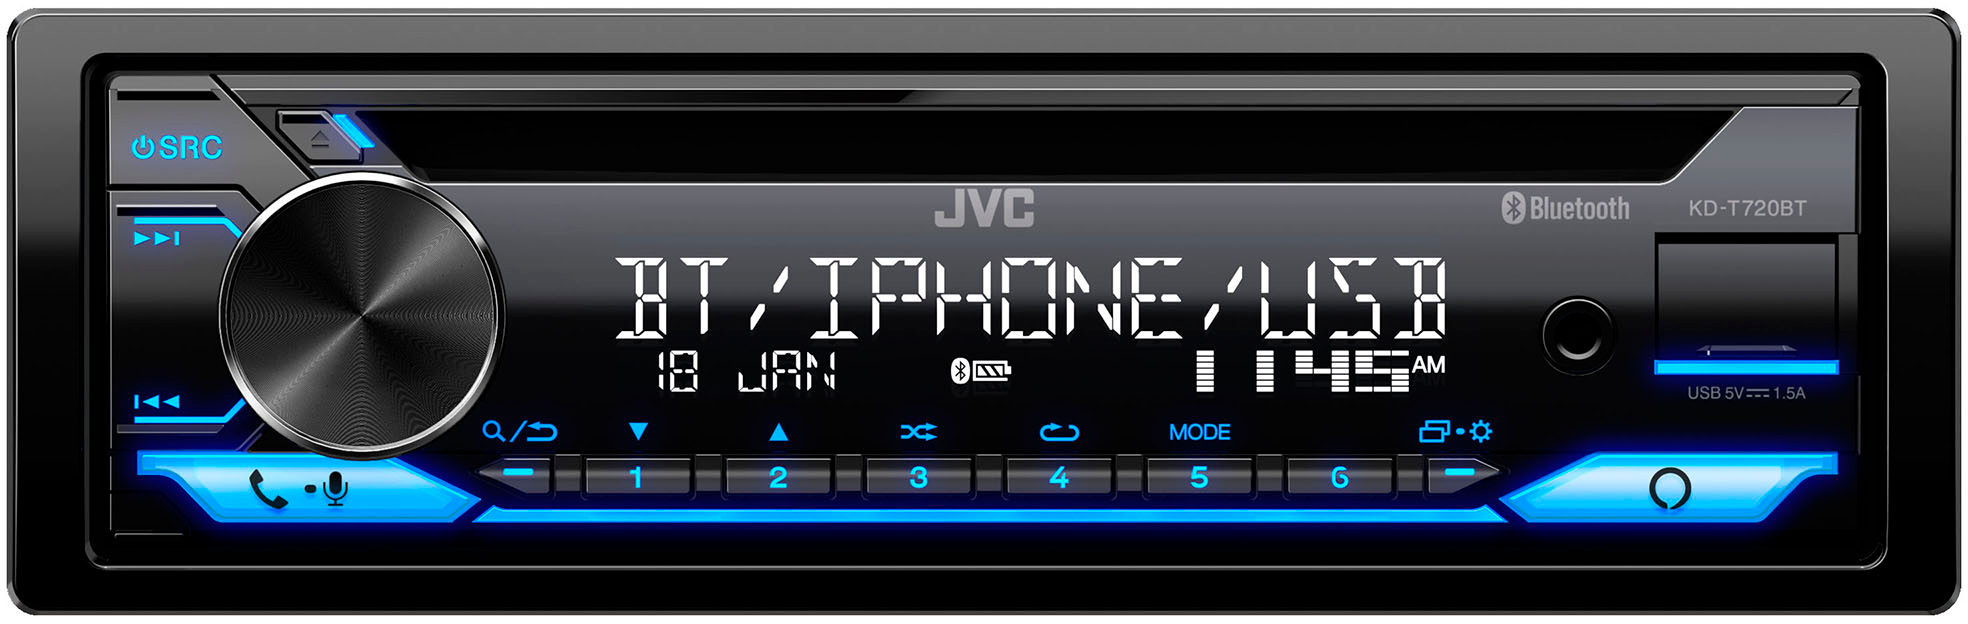 JVC - Bluetooth CD Receiver with Alexa Built-In and USB Rapid Charge, Detachable Faceplate - Black